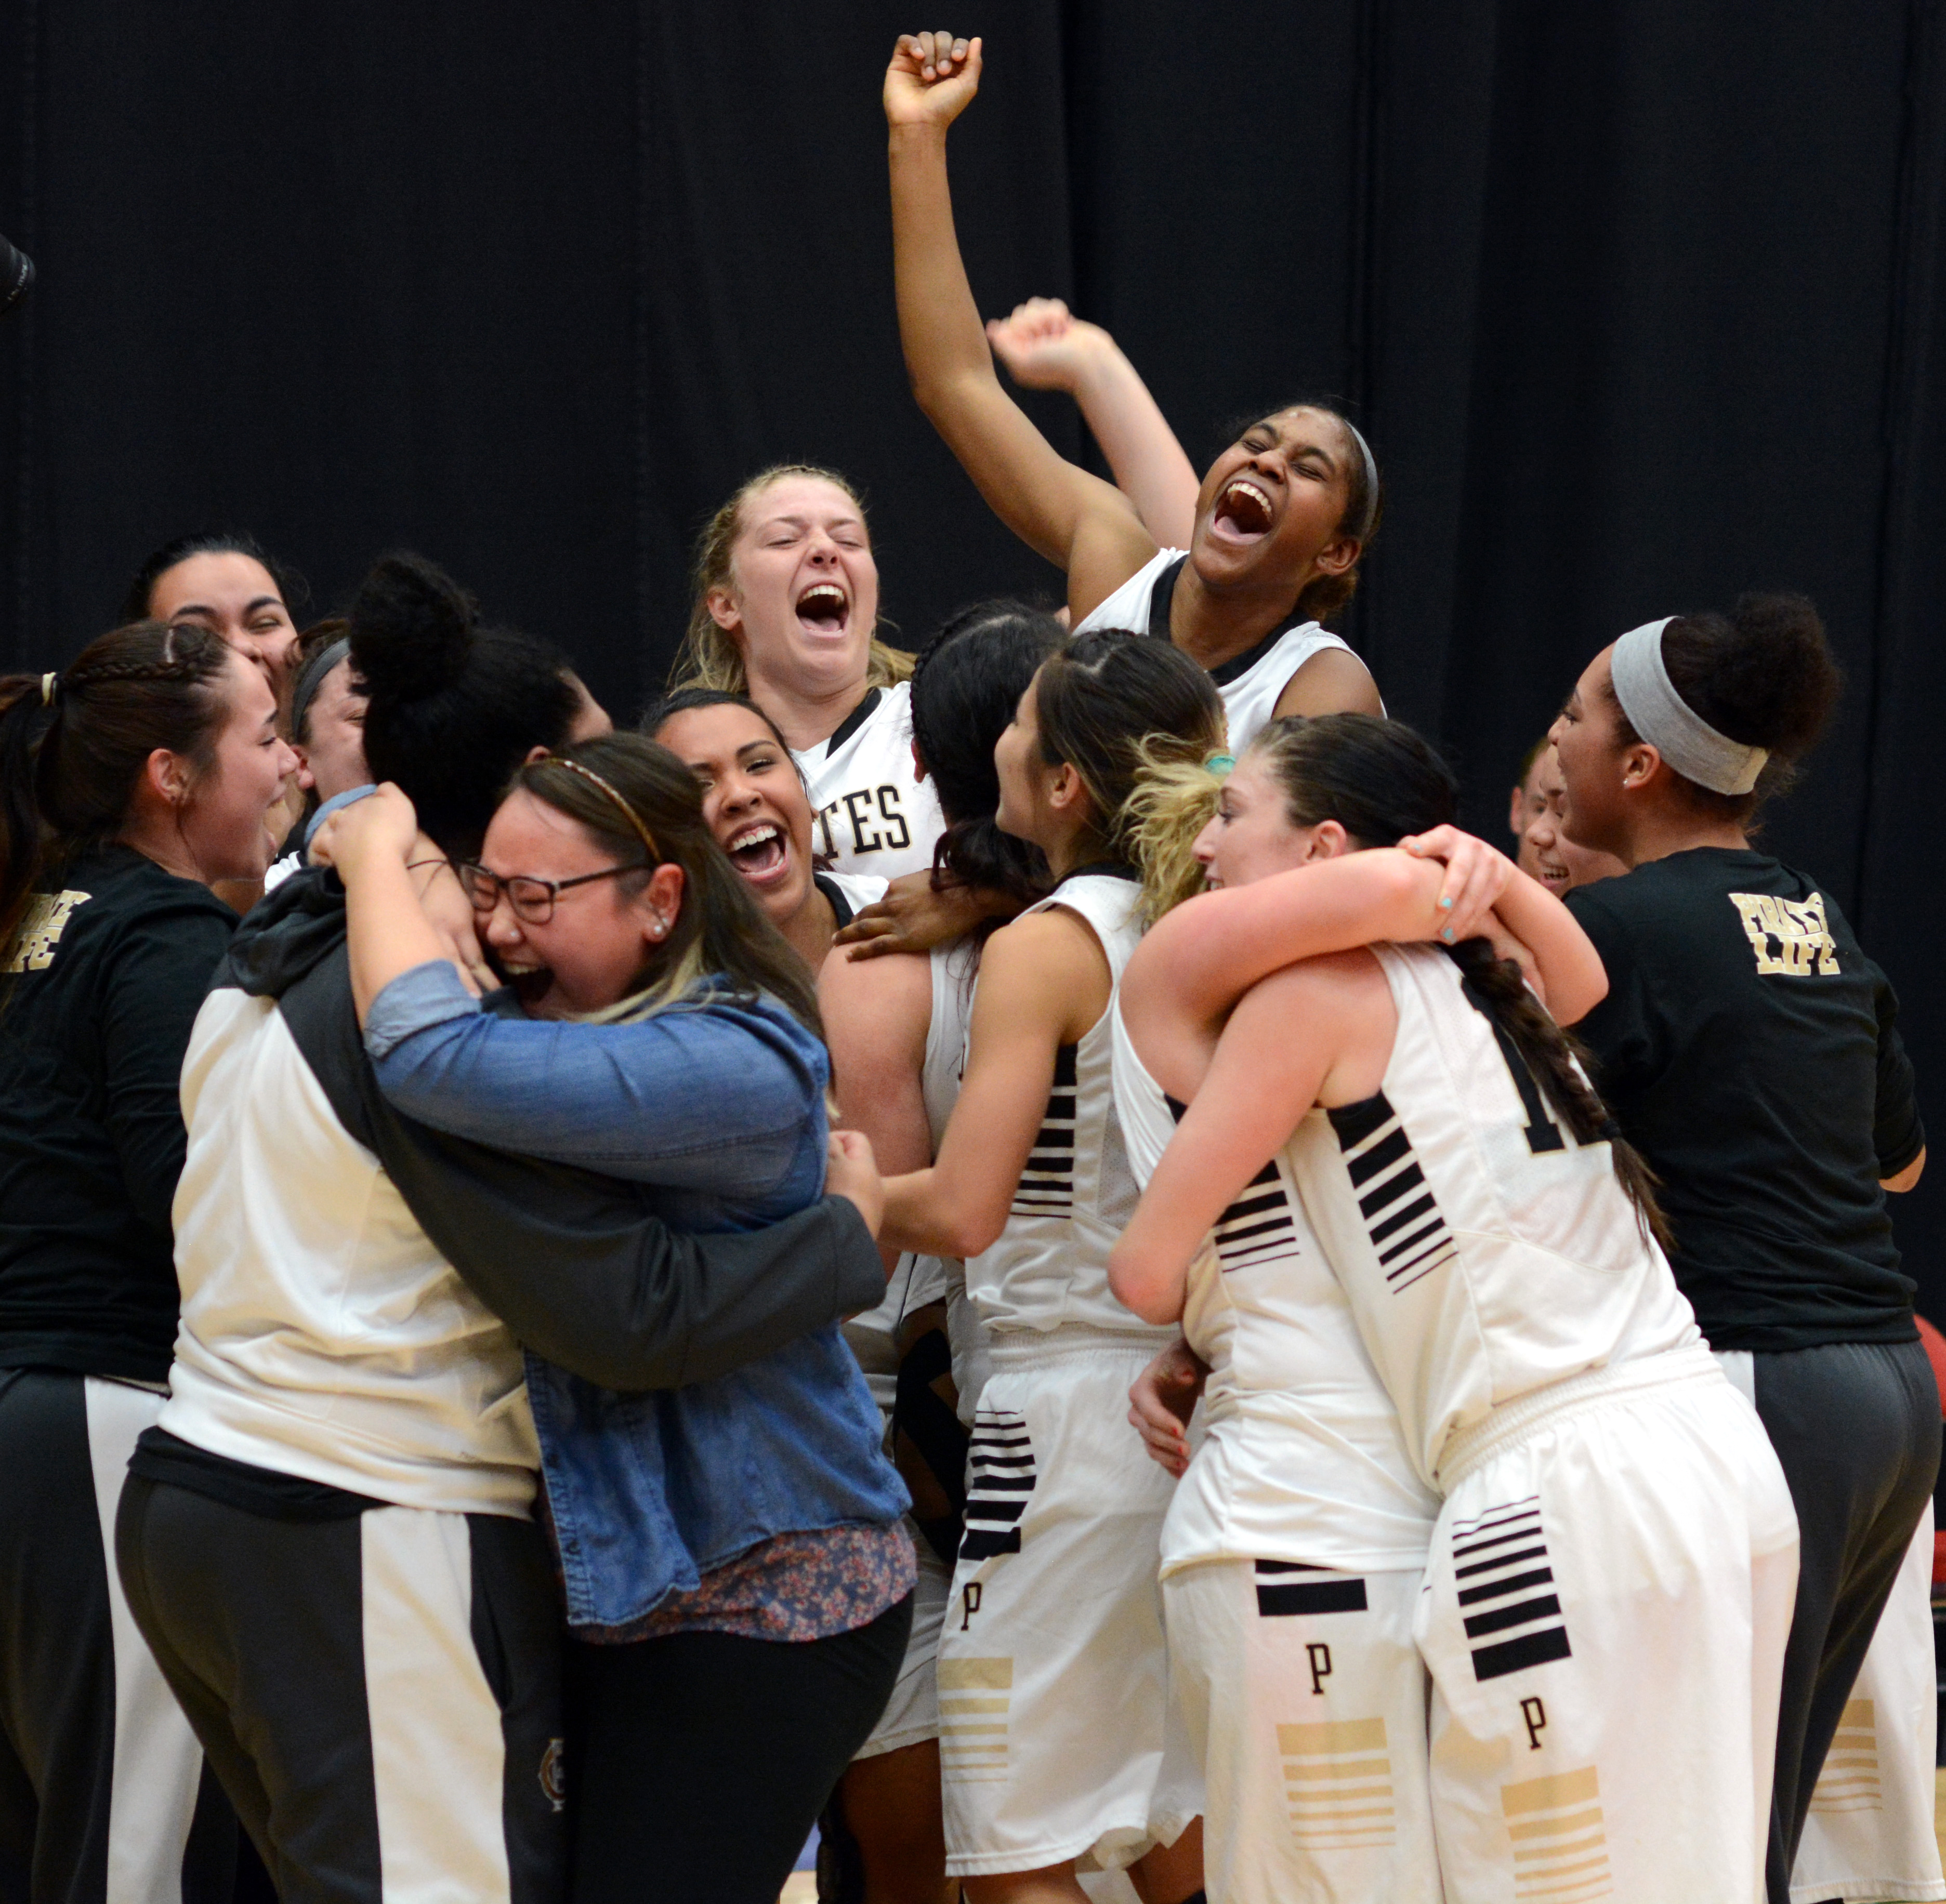 The Peninsula College women's basketball team celebrates after beating Lane to claim the Northwest Athletic Conference championship in Kennewick. (Rick Ross/Peninsula College)